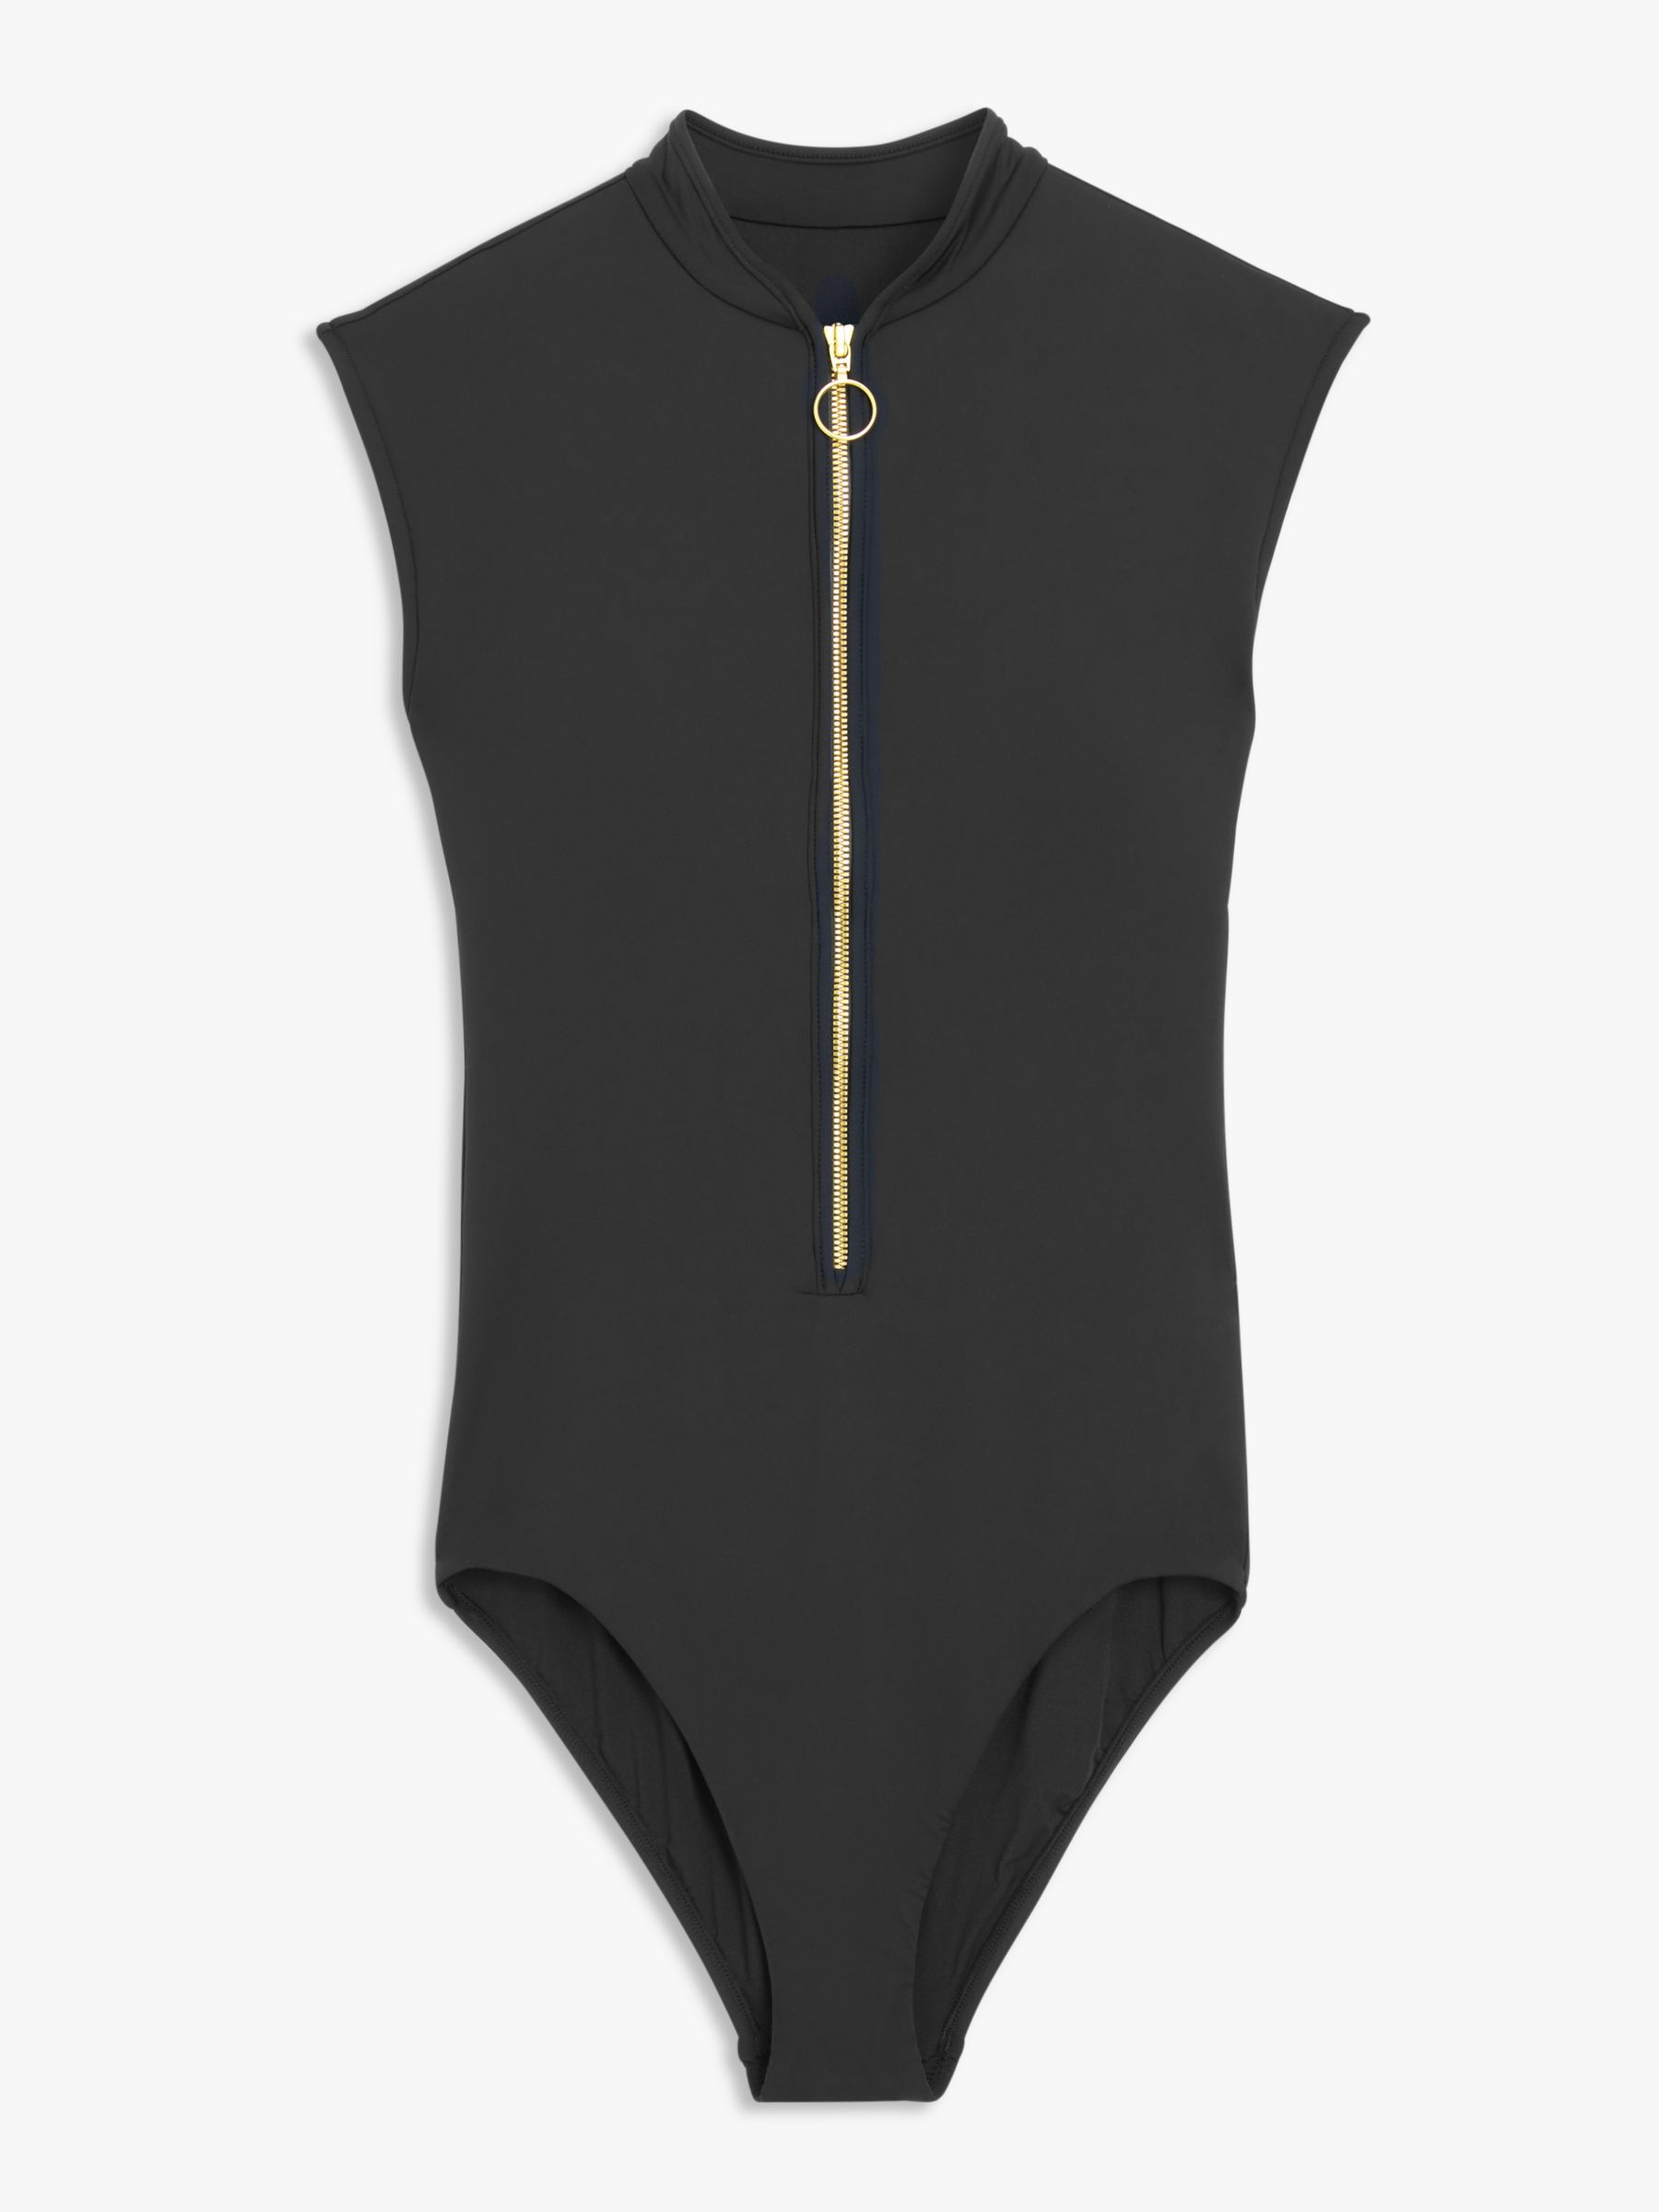 Seafolly Zip Front One Piece Swimsuit, Black, 8